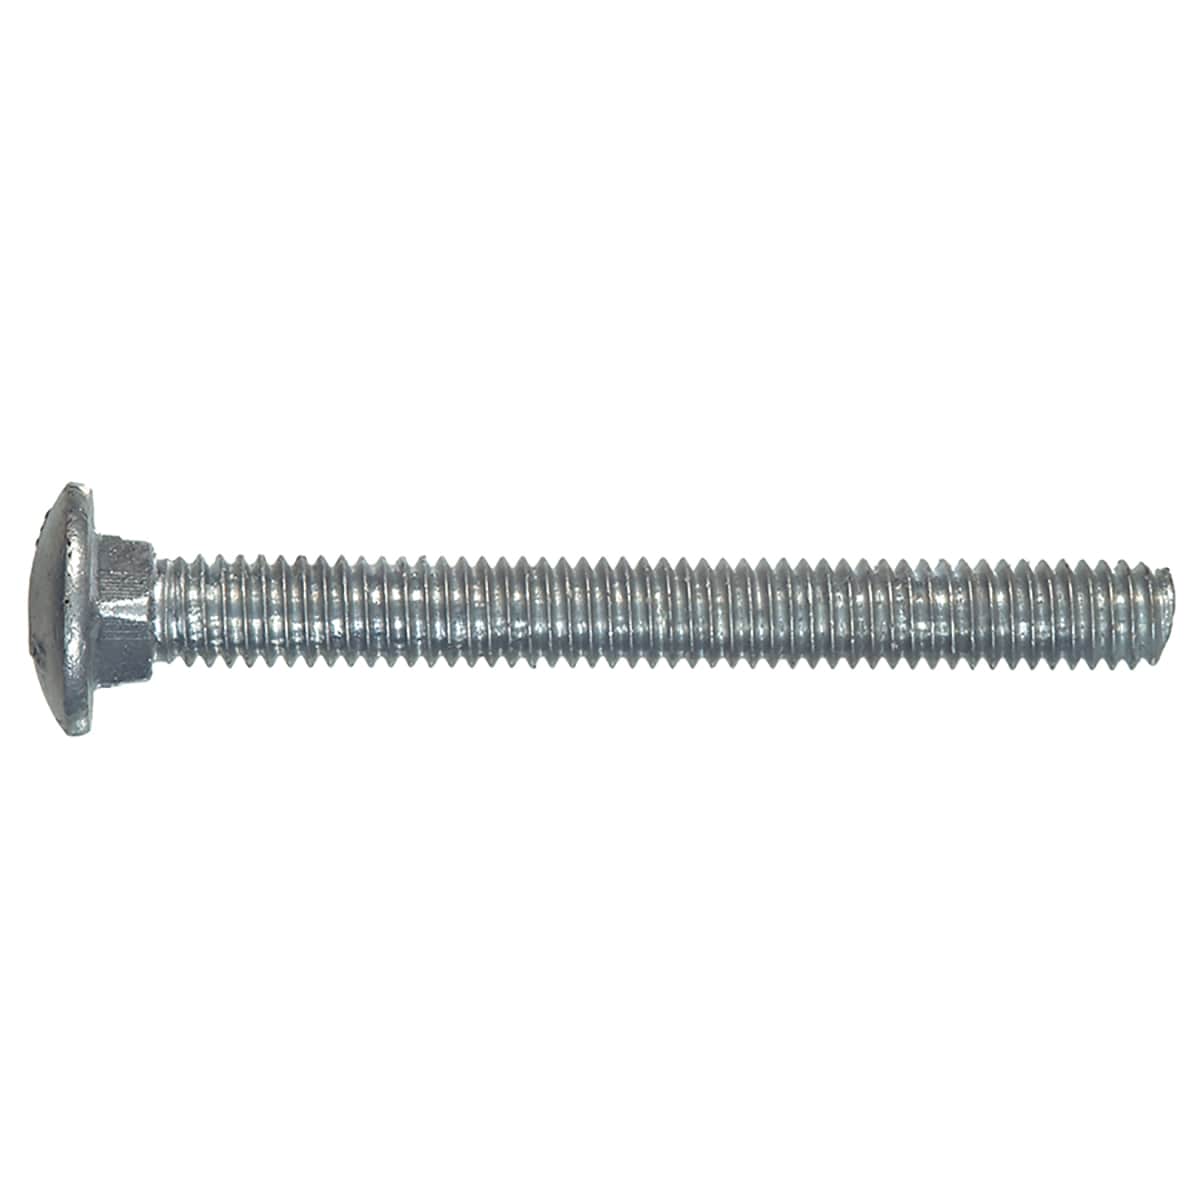 1/4-20 x 1" Carriage Bolts and Nuts Hot Dip Galvanized Quantity 500 